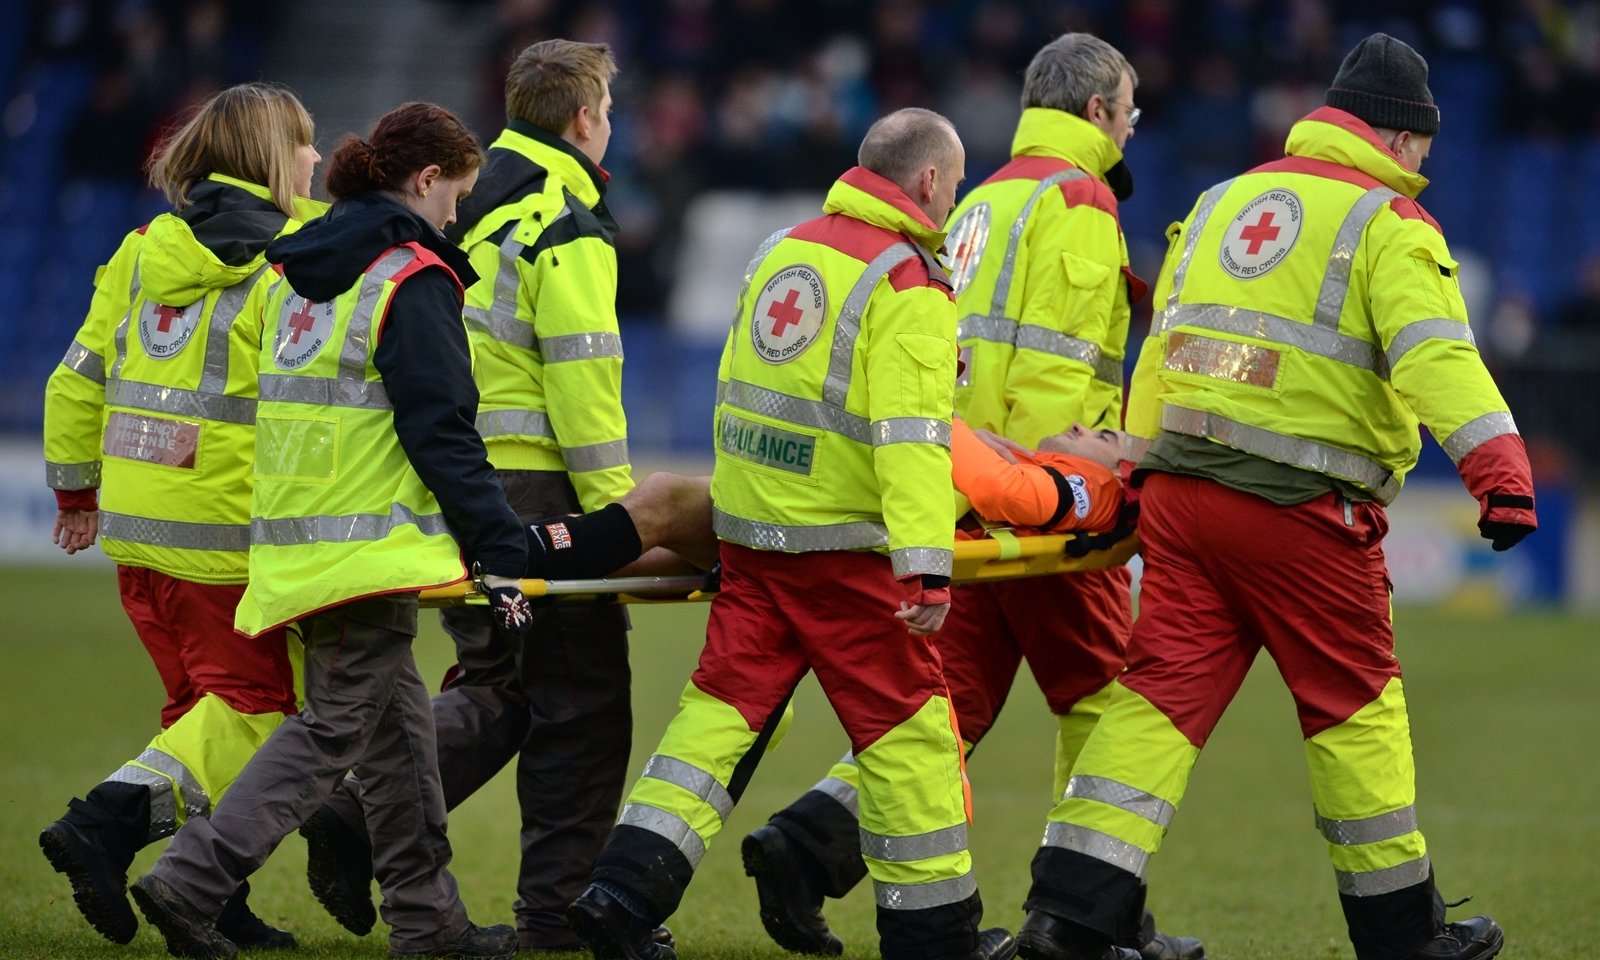 12/01/14 SCOTTISH PREMIERSHIP
ICT v DUNDEE UTD (1-1)
TULLOCH CALEDONIAN STADIUM - INVERNESS
Dundee Utd striker Brian Graham is removed from the field on a stretcher bringing to an end his involvement in the match.